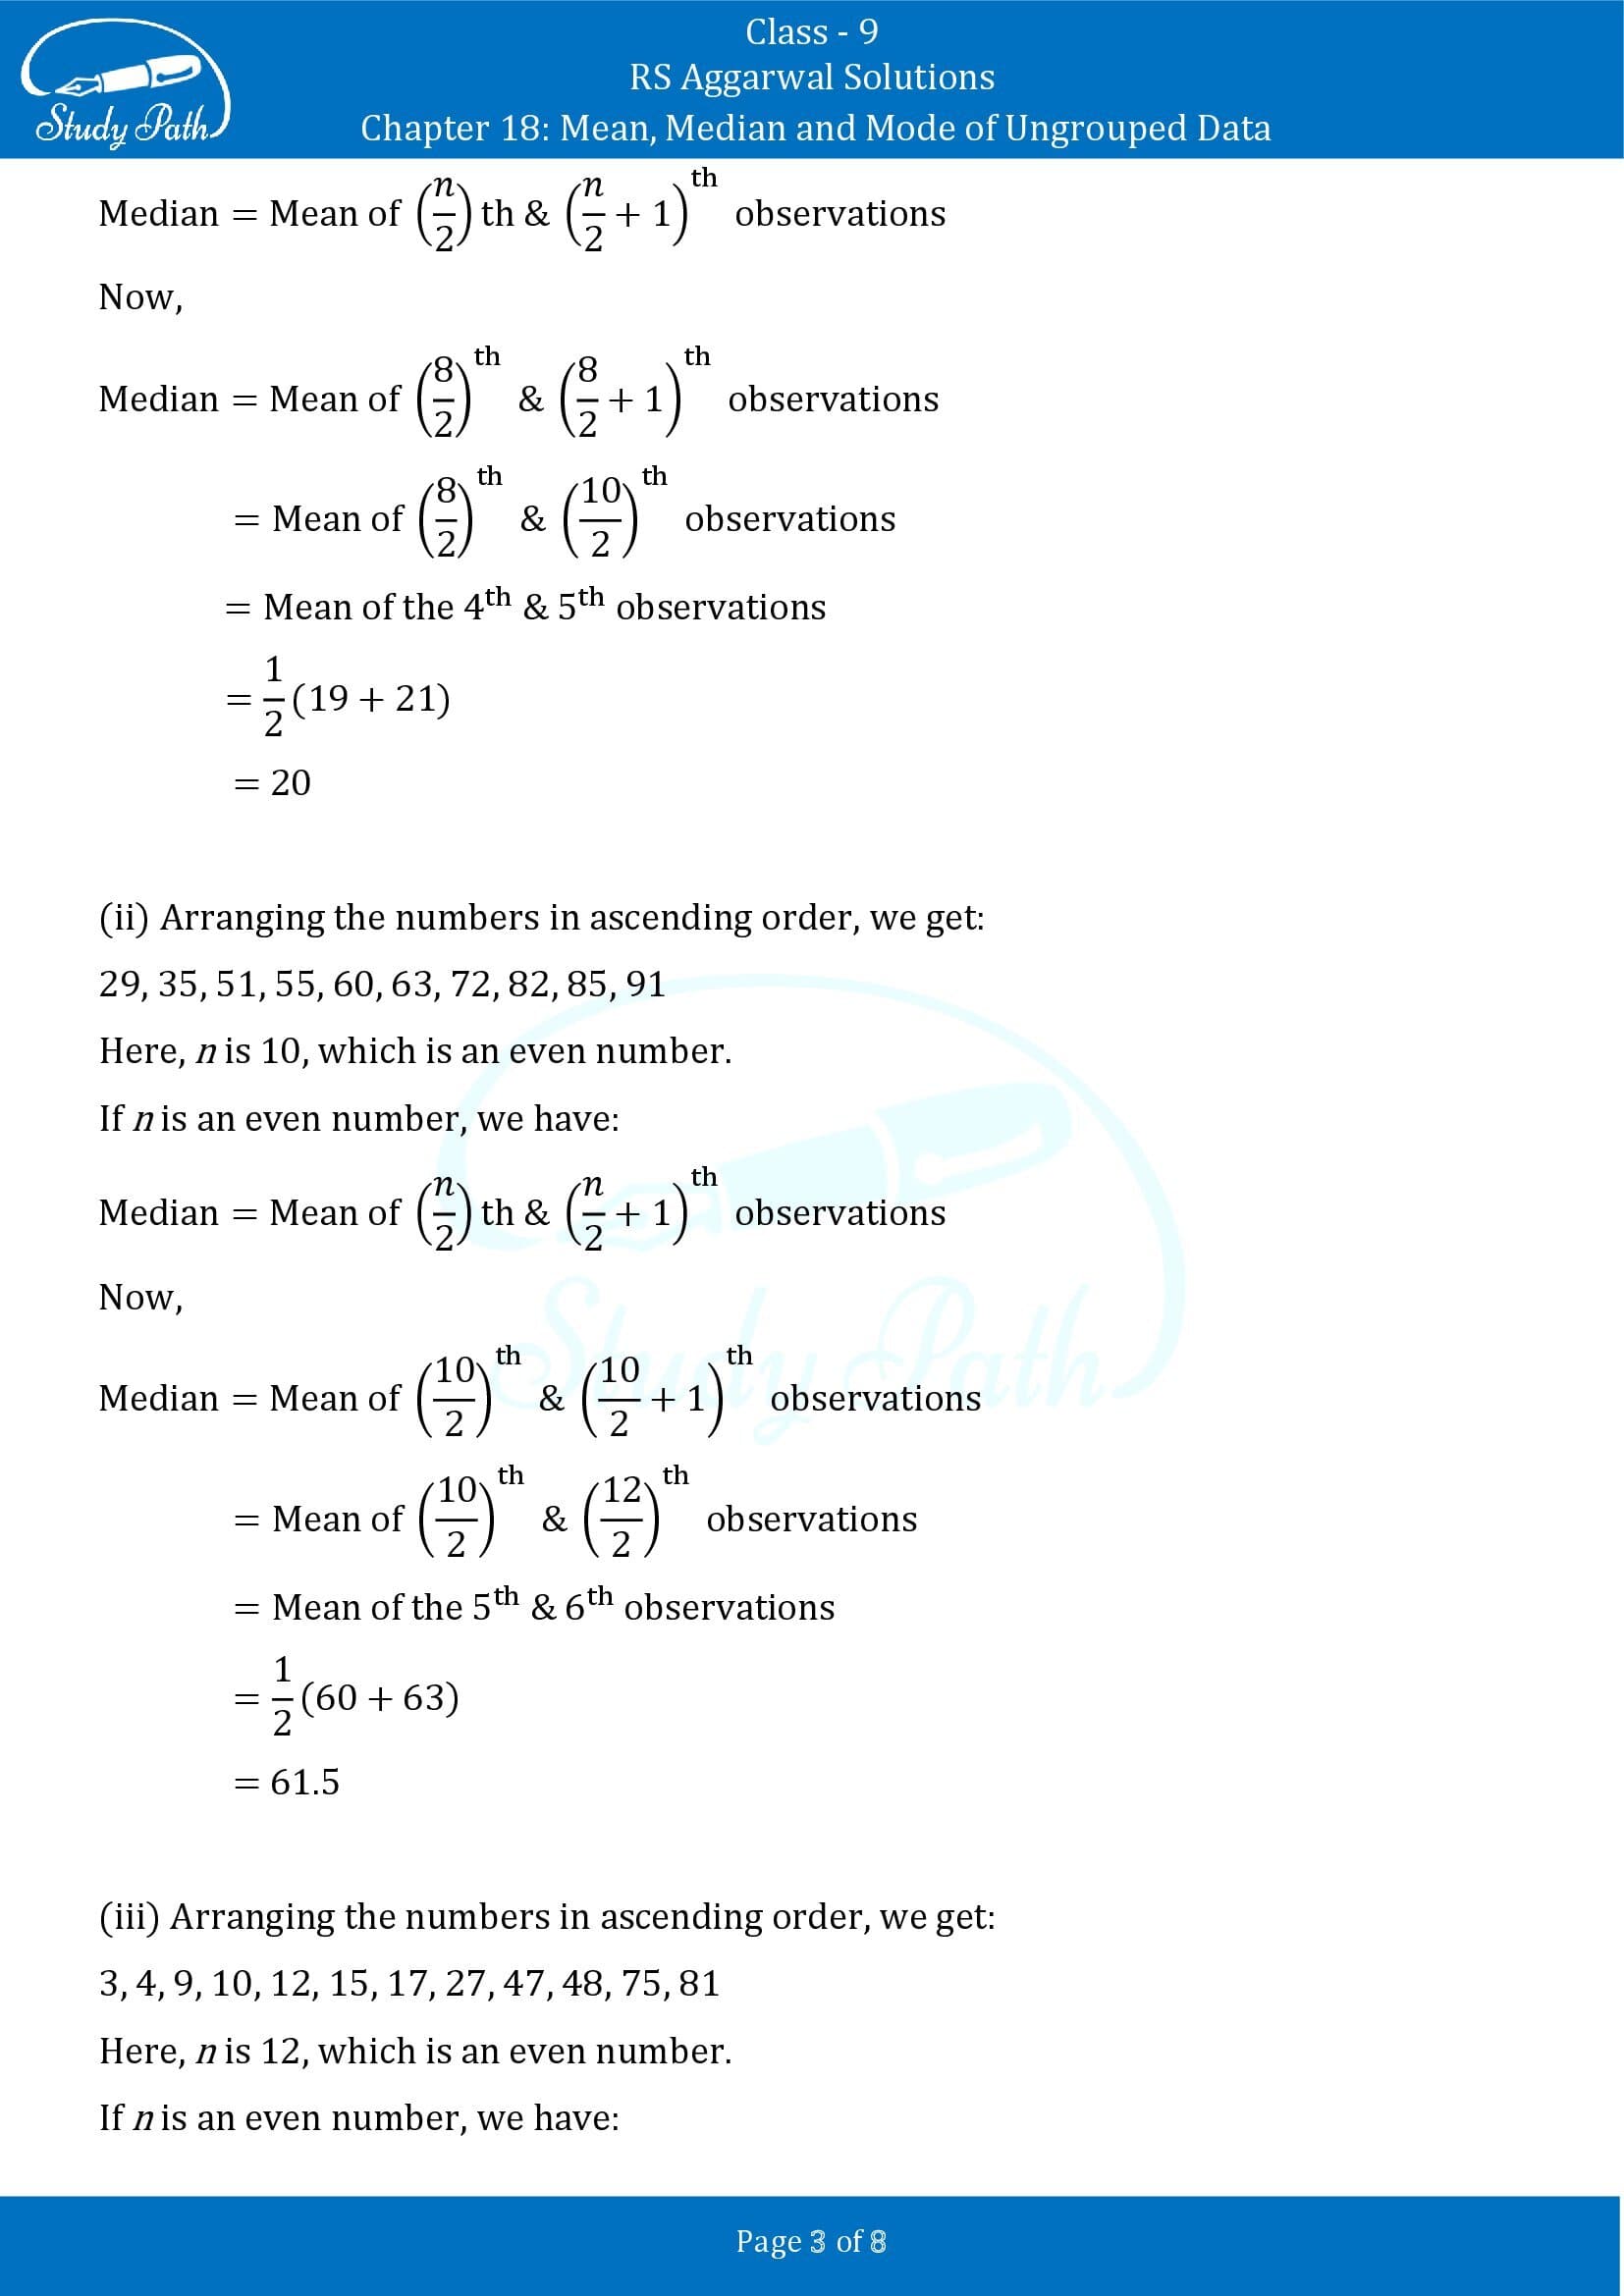 RS Aggarwal Solutions Class 9 Chapter 18 Mean Median and Mode of Ungrouped Data Exercise 18C 0003